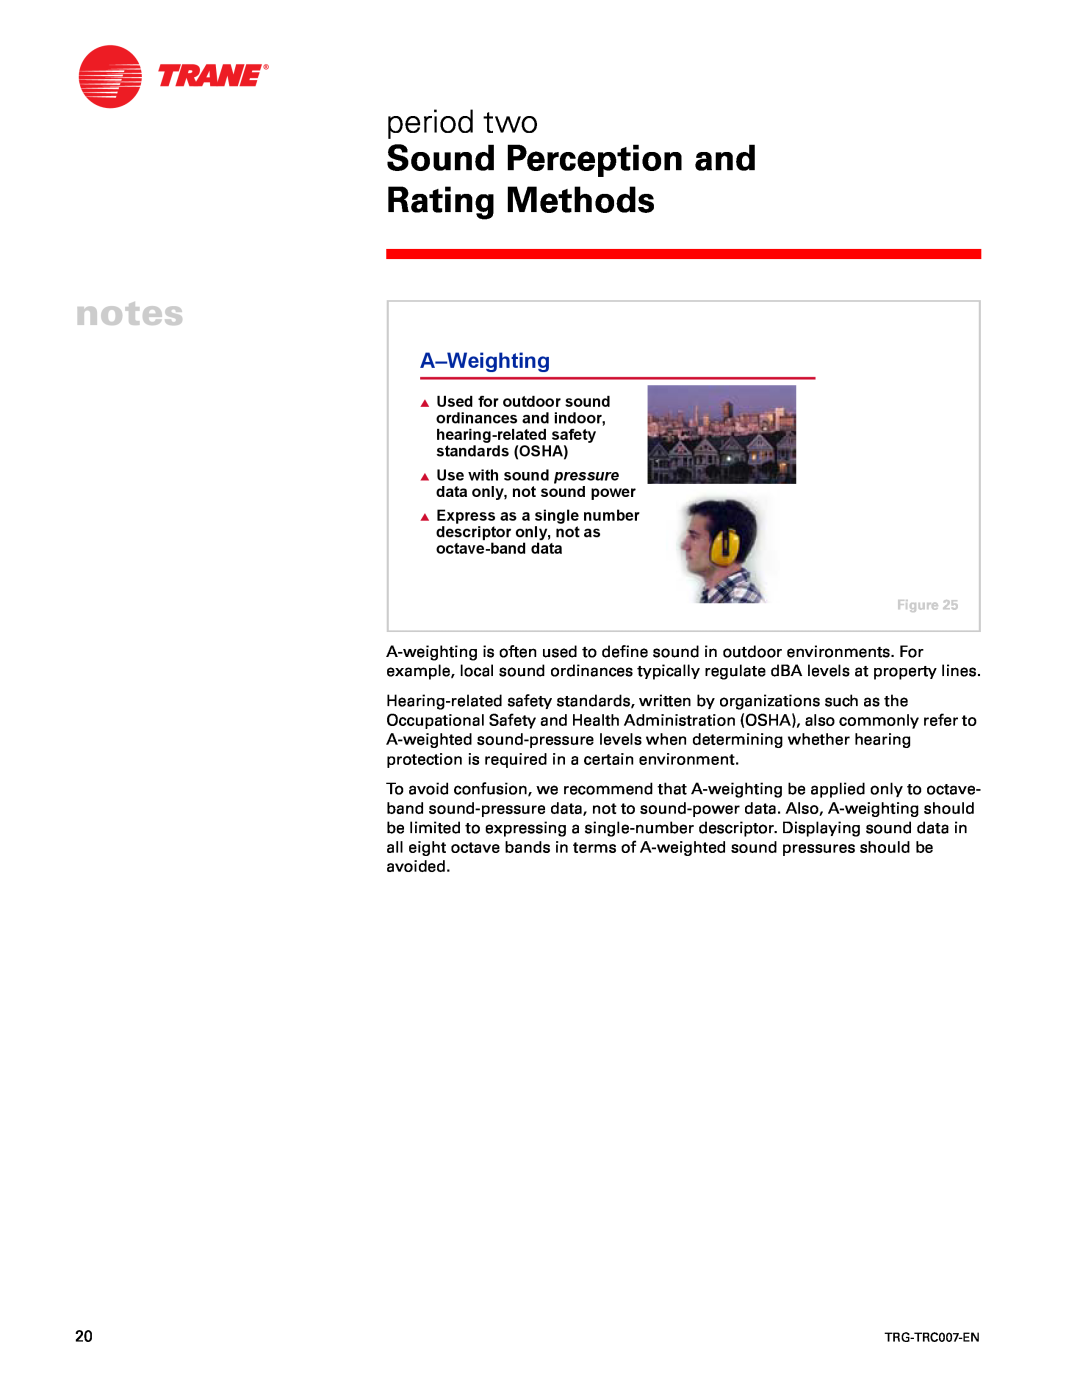 Trane TRG-TRC007-EN manual A-Weighting, Sound Perception and Rating Methods, period two 